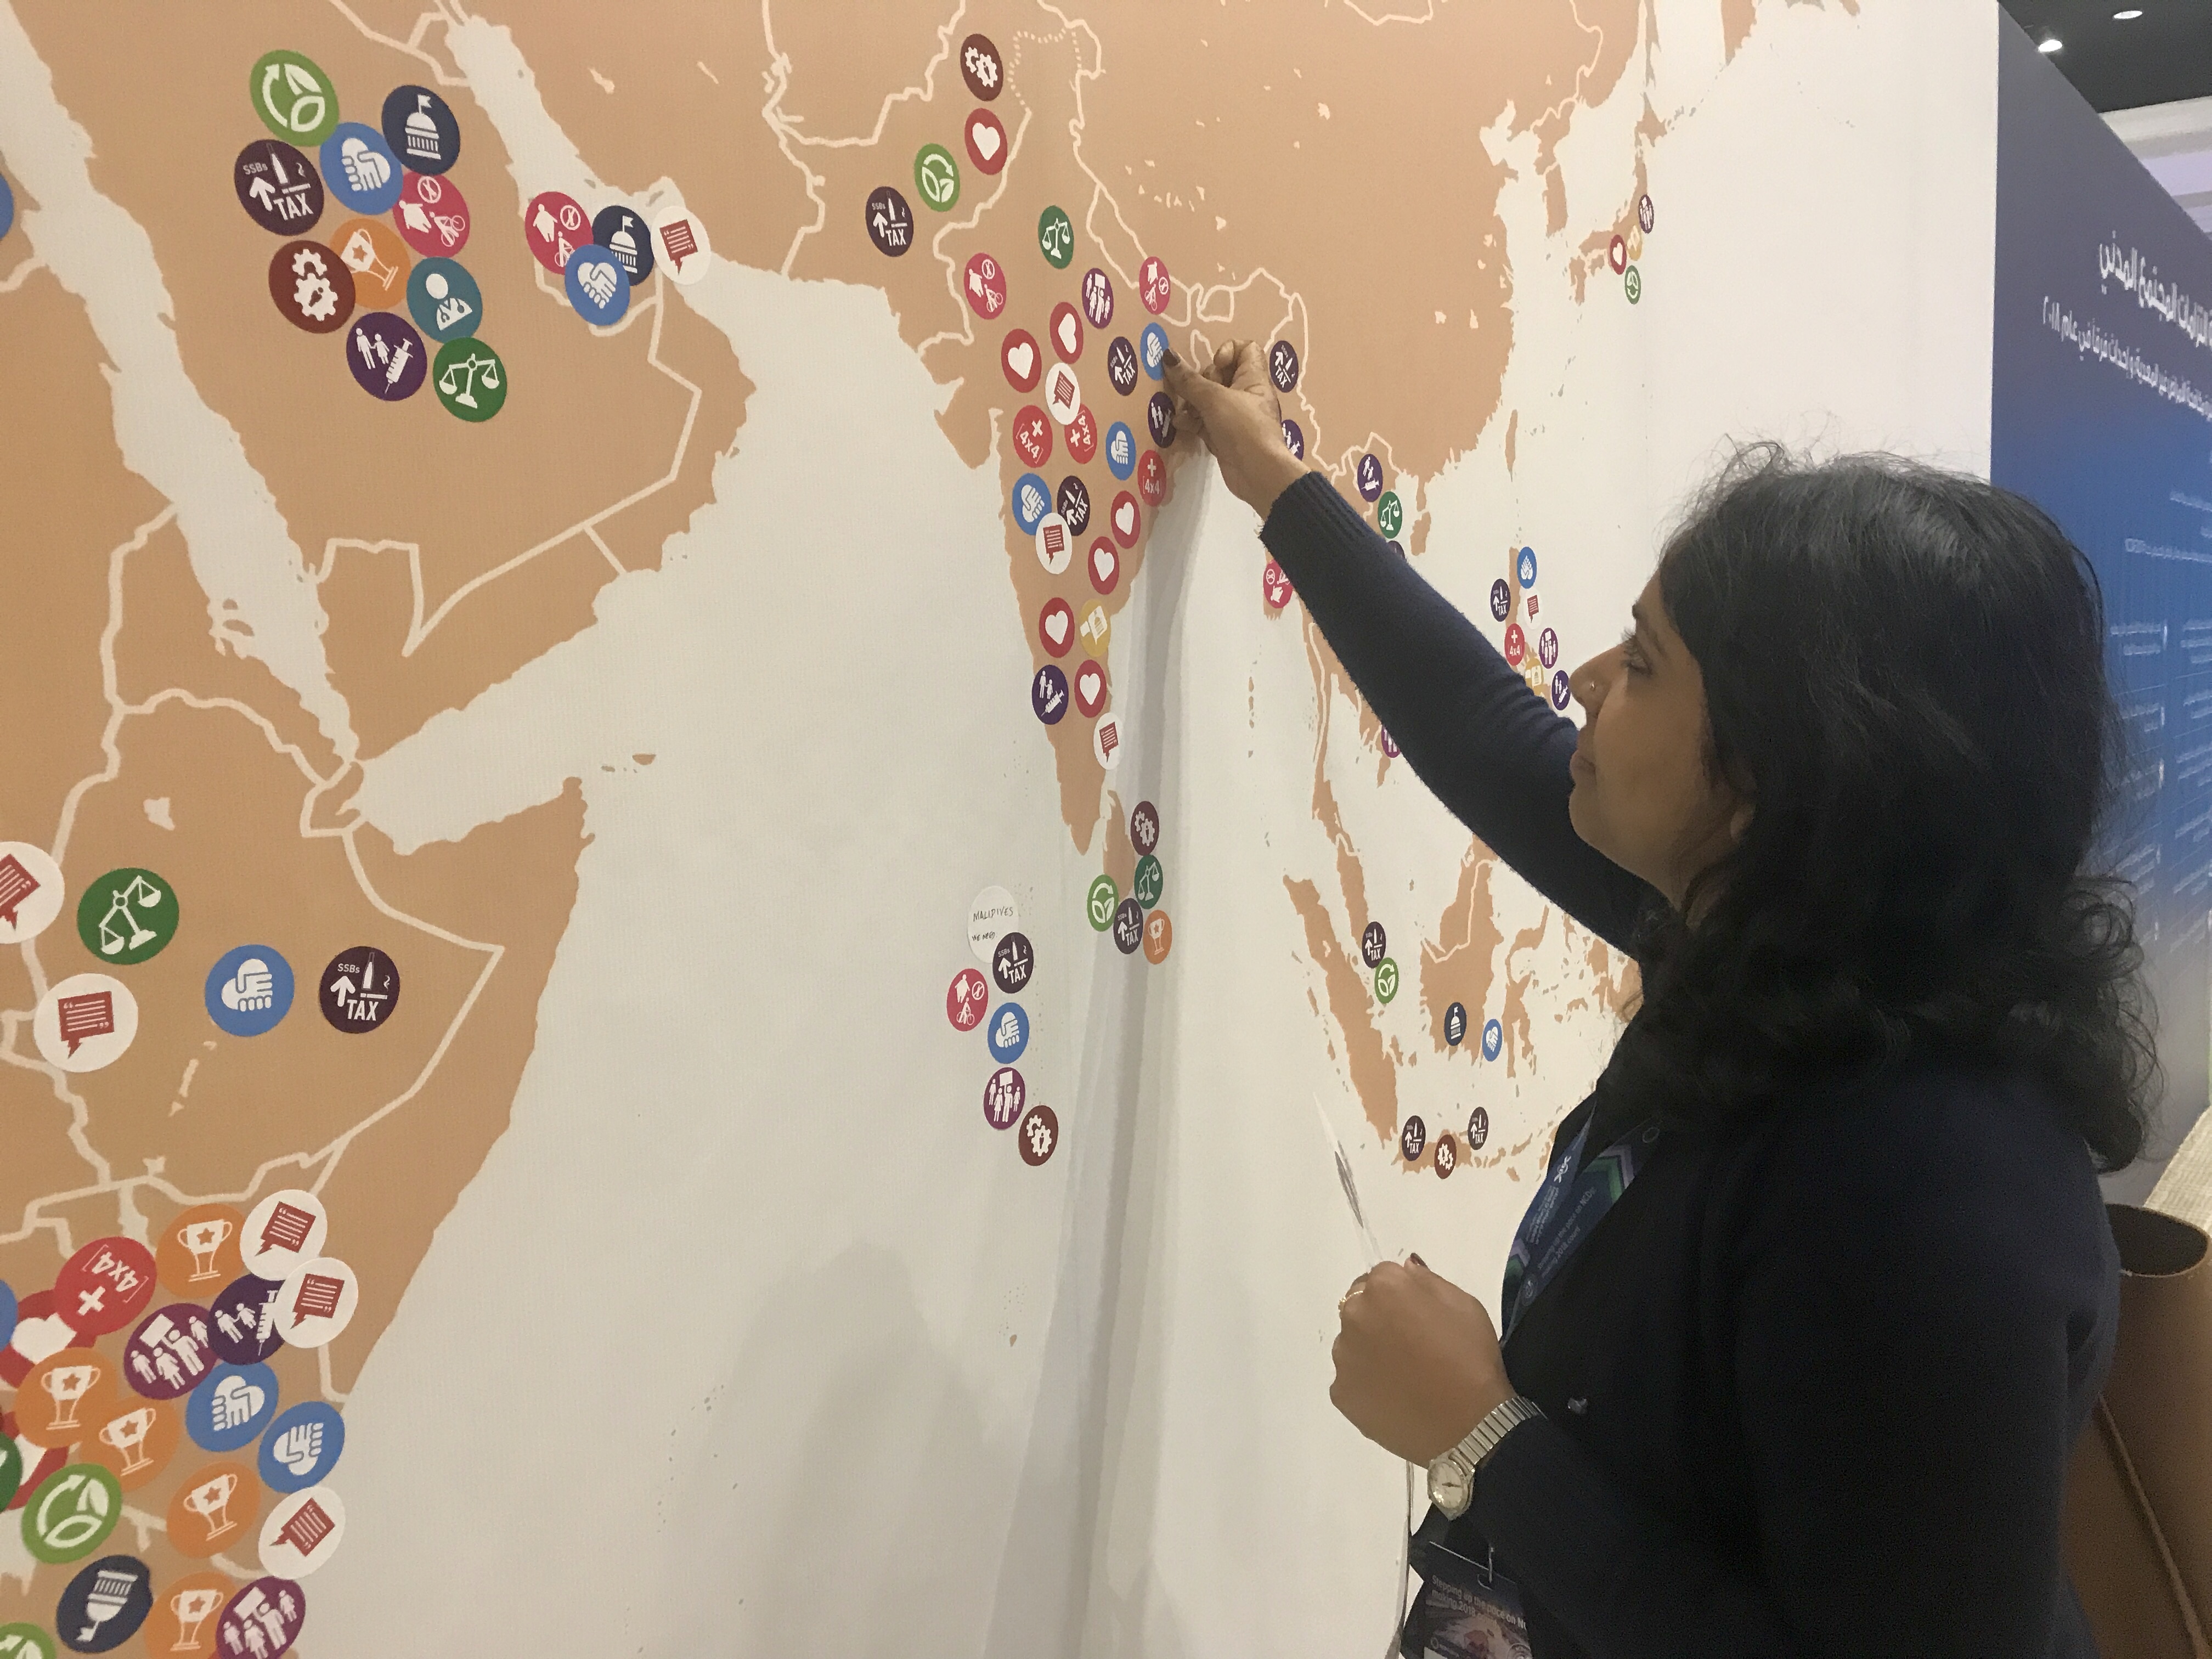 Vindhya Vatsyayan adds her commitment to the map